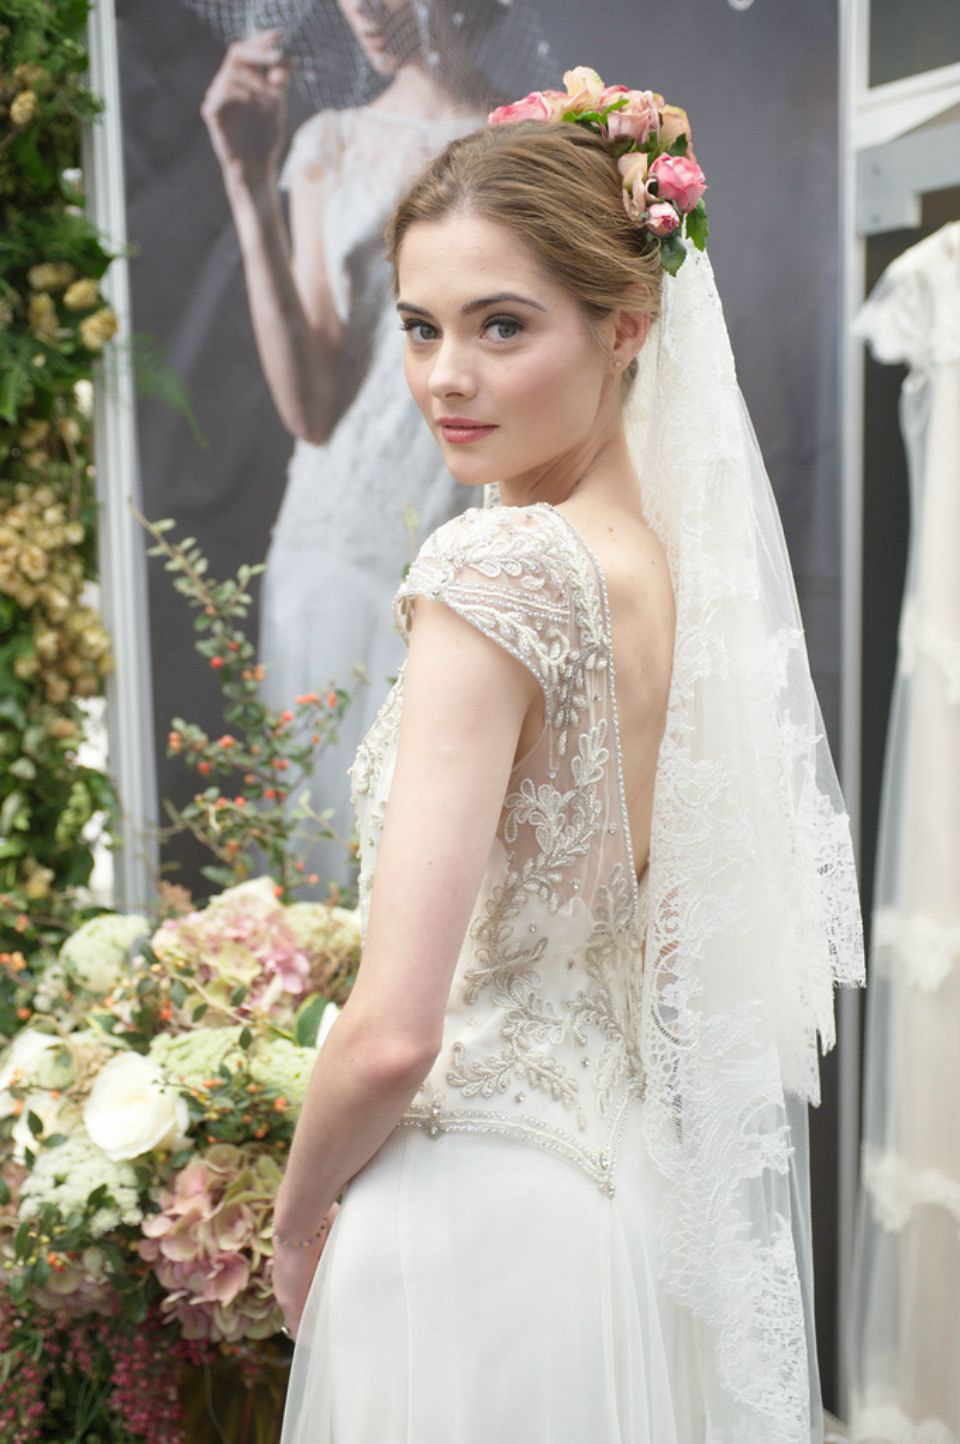 Brides The Show, 2-4 October 2015, London